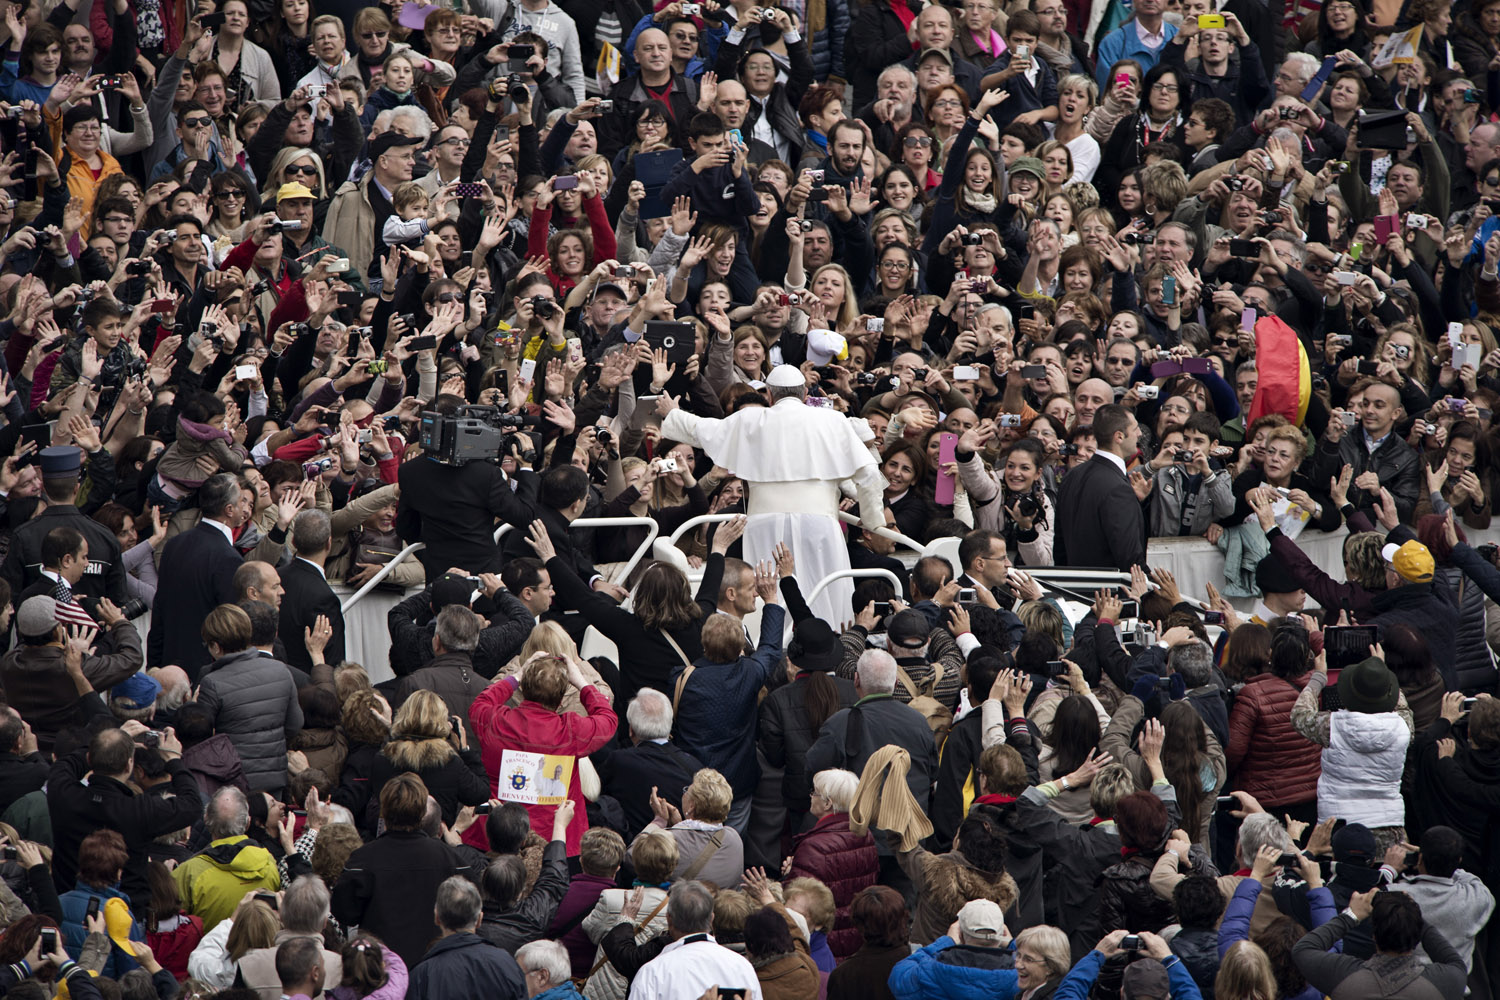 vatican city, italy. nov 13th 2013. Saint Peter's Square, at 10:30 am Pope Francis General Audience.